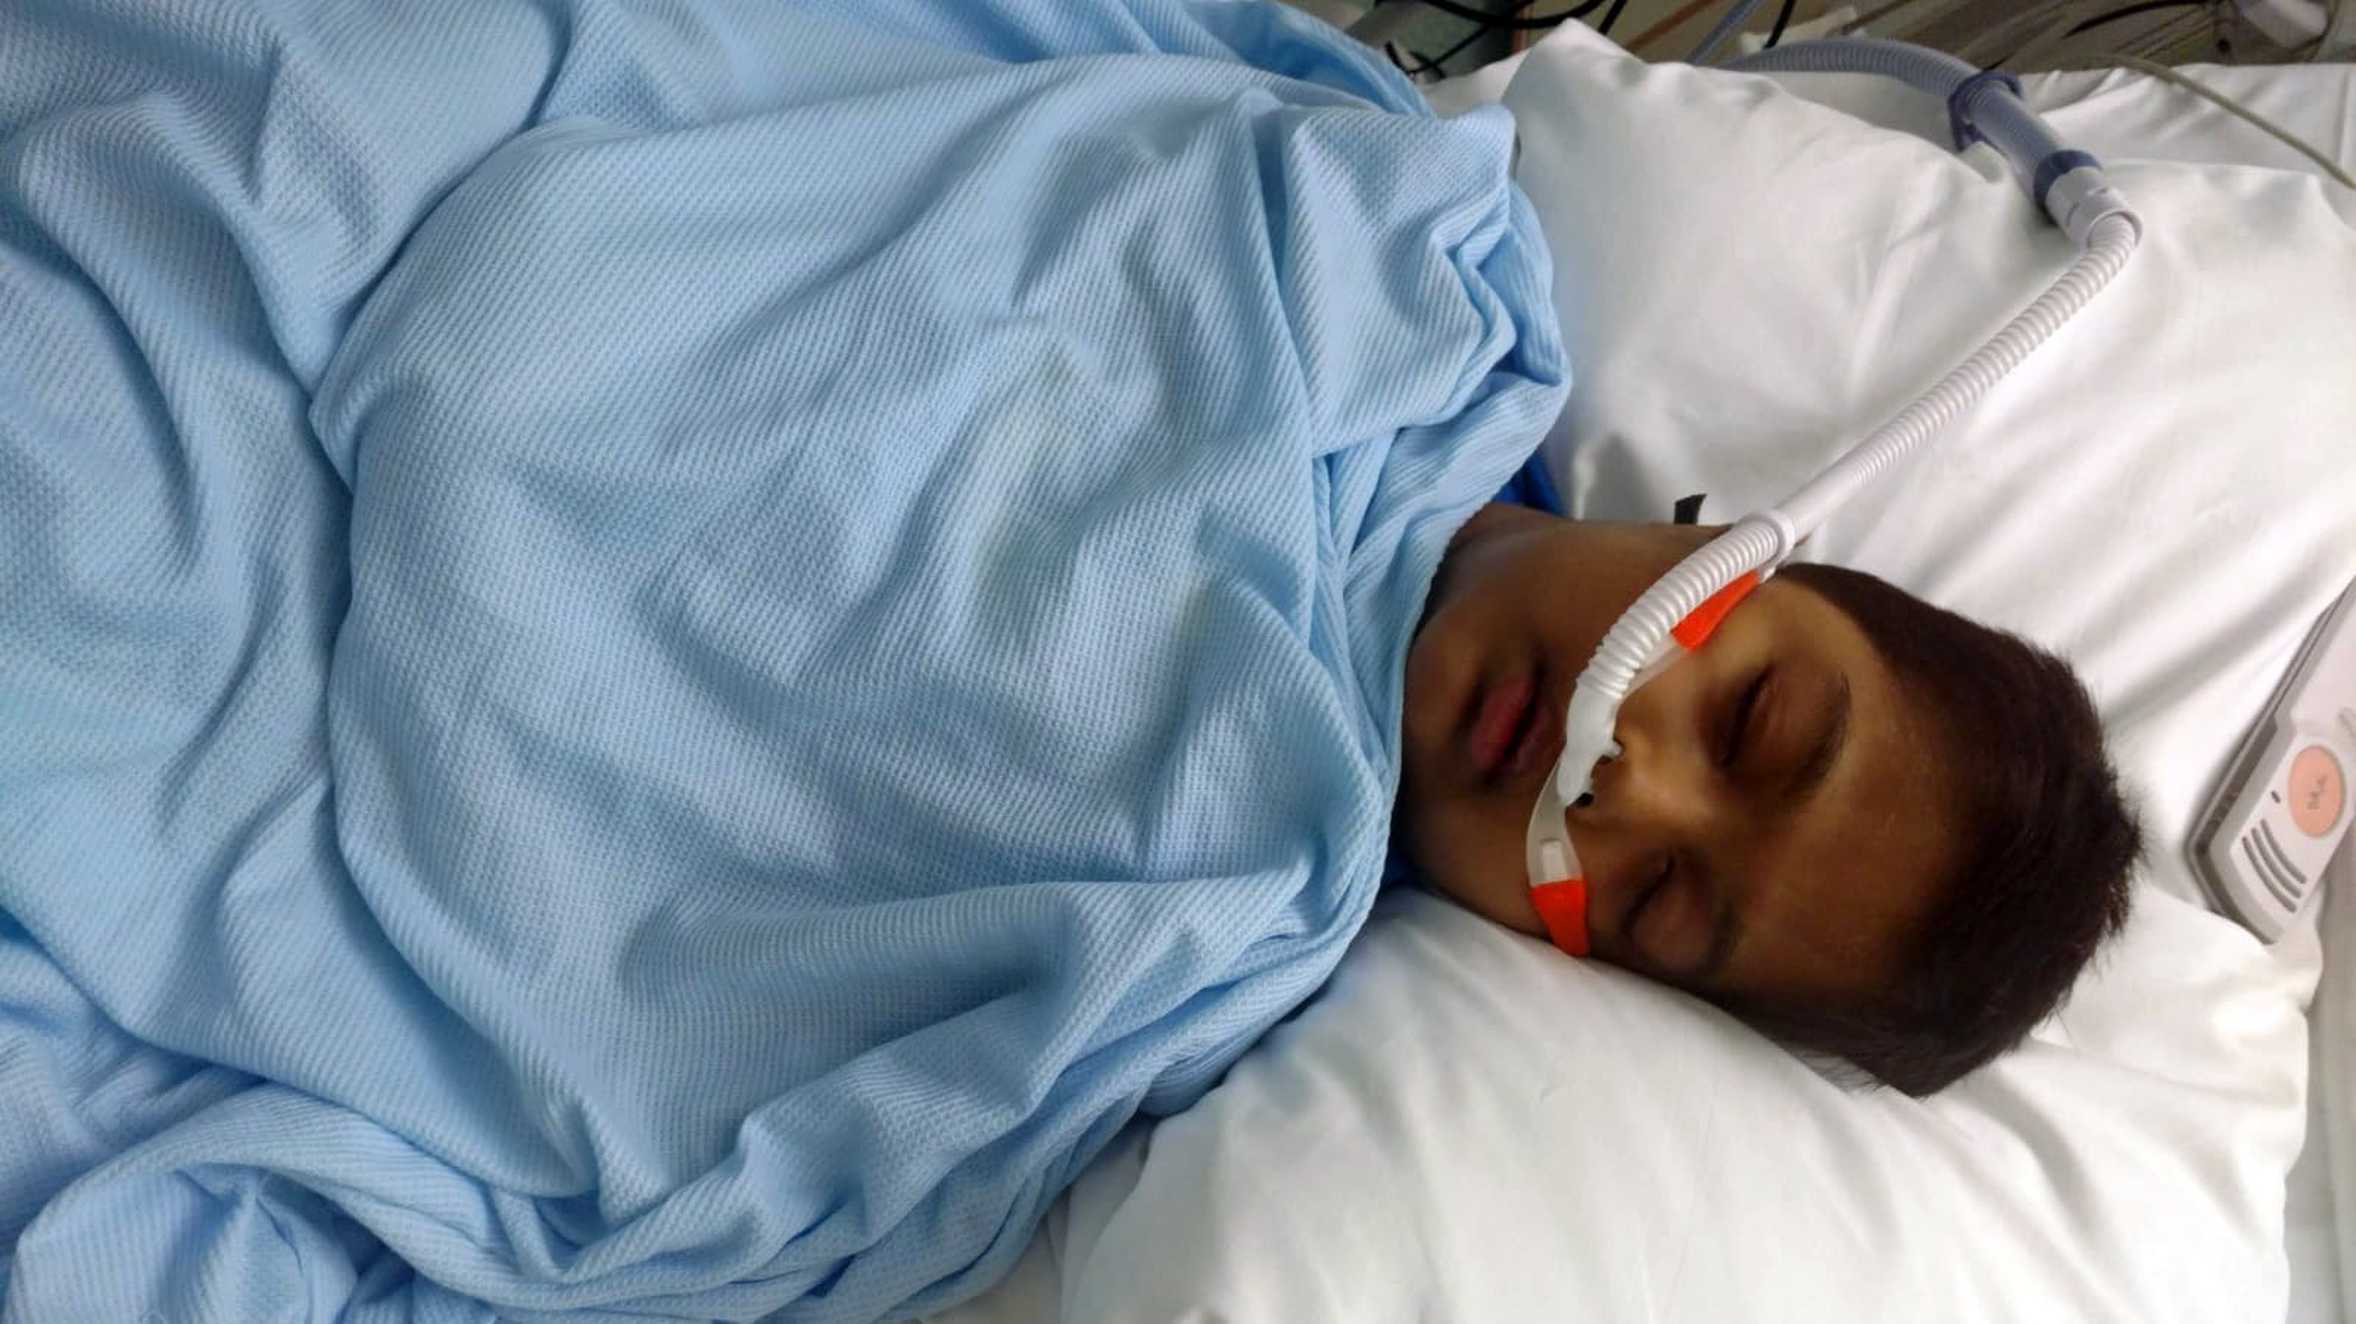 Abhi lying in a hospital bed during treatment for his condition.